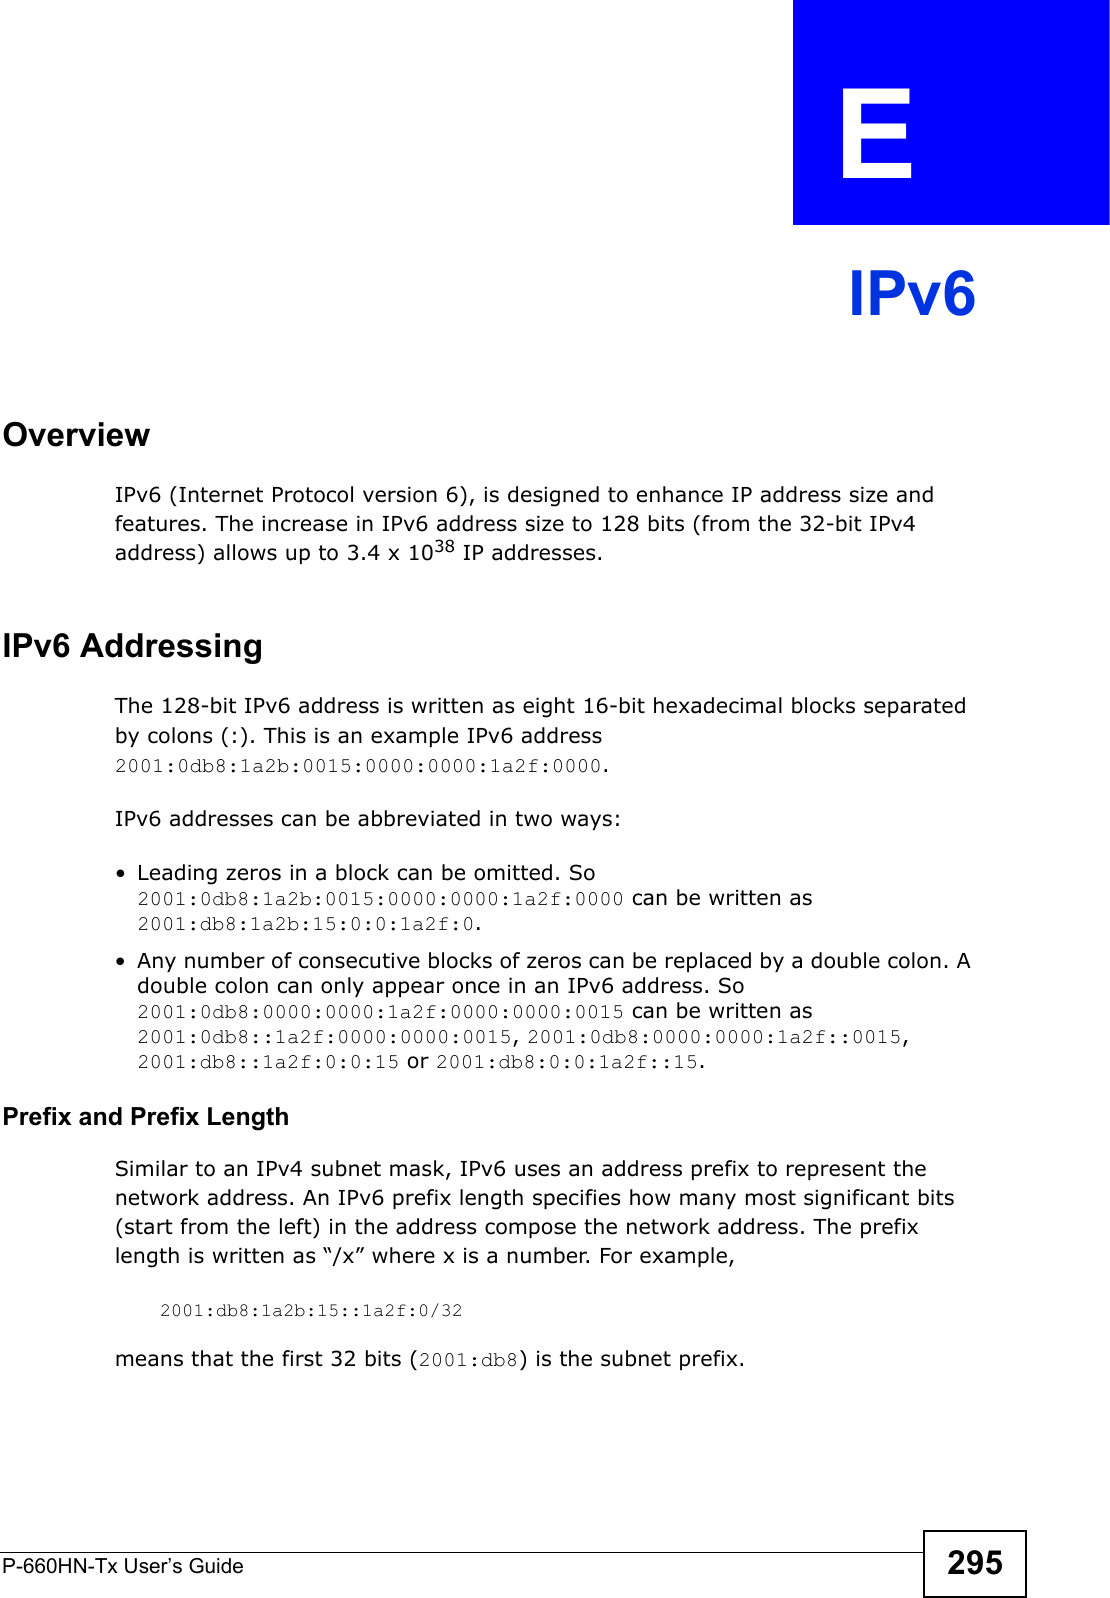 P-660HN-Tx User’s Guide 295APPENDIX  E IPv6OverviewIPv6 (Internet Protocol version 6), is designed to enhance IP address size and features. The increase in IPv6 address size to 128 bits (from the 32-bit IPv4 address) allows up to 3.4 x 1038 IP addresses. IPv6 AddressingThe 128-bit IPv6 address is written as eight 16-bit hexadecimal blocks separated by colons (:). This is an example IPv6 address 2001:0db8:1a2b:0015:0000:0000:1a2f:0000. IPv6 addresses can be abbreviated in two ways:• Leading zeros in a block can be omitted. So 2001:0db8:1a2b:0015:0000:0000:1a2f:0000 can be written as 2001:db8:1a2b:15:0:0:1a2f:0. • Any number of consecutive blocks of zeros can be replaced by a double colon. A double colon can only appear once in an IPv6 address. So 2001:0db8:0000:0000:1a2f:0000:0000:0015 can be written as 2001:0db8::1a2f:0000:0000:0015, 2001:0db8:0000:0000:1a2f::0015, 2001:db8::1a2f:0:0:15 or 2001:db8:0:0:1a2f::15.Prefix and Prefix LengthSimilar to an IPv4 subnet mask, IPv6 uses an address prefix to represent the network address. An IPv6 prefix length specifies how many most significant bits (start from the left) in the address compose the network address. The prefix length is written as “/x” where x is a number. For example, 2001:db8:1a2b:15::1a2f:0/32means that the first 32 bits (2001:db8) is the subnet prefix. 